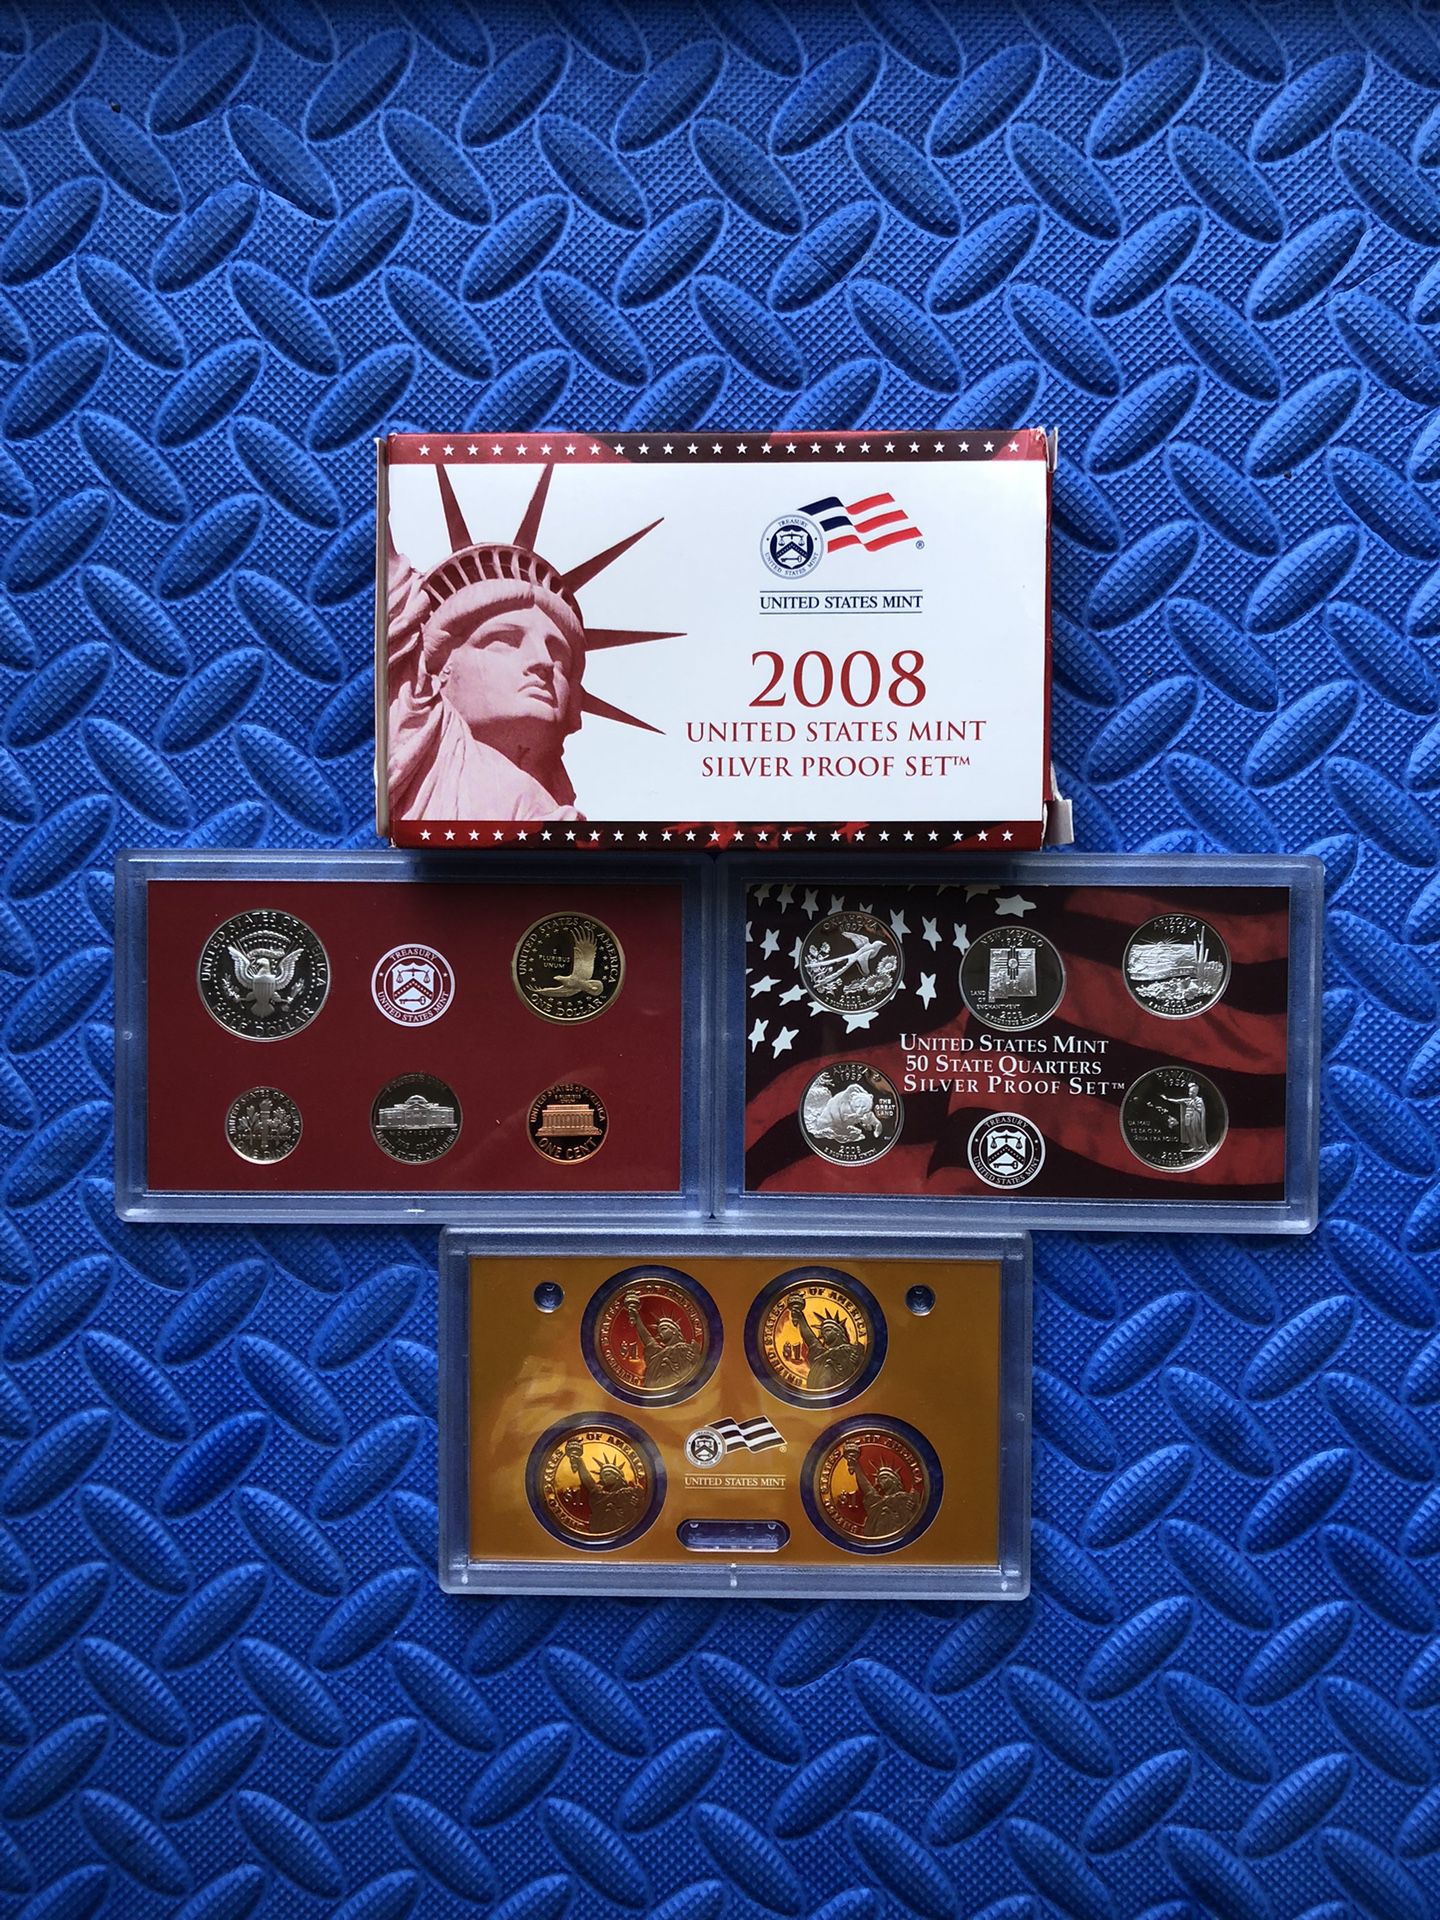 New 2008 Silver Proof US Mint Coin Set